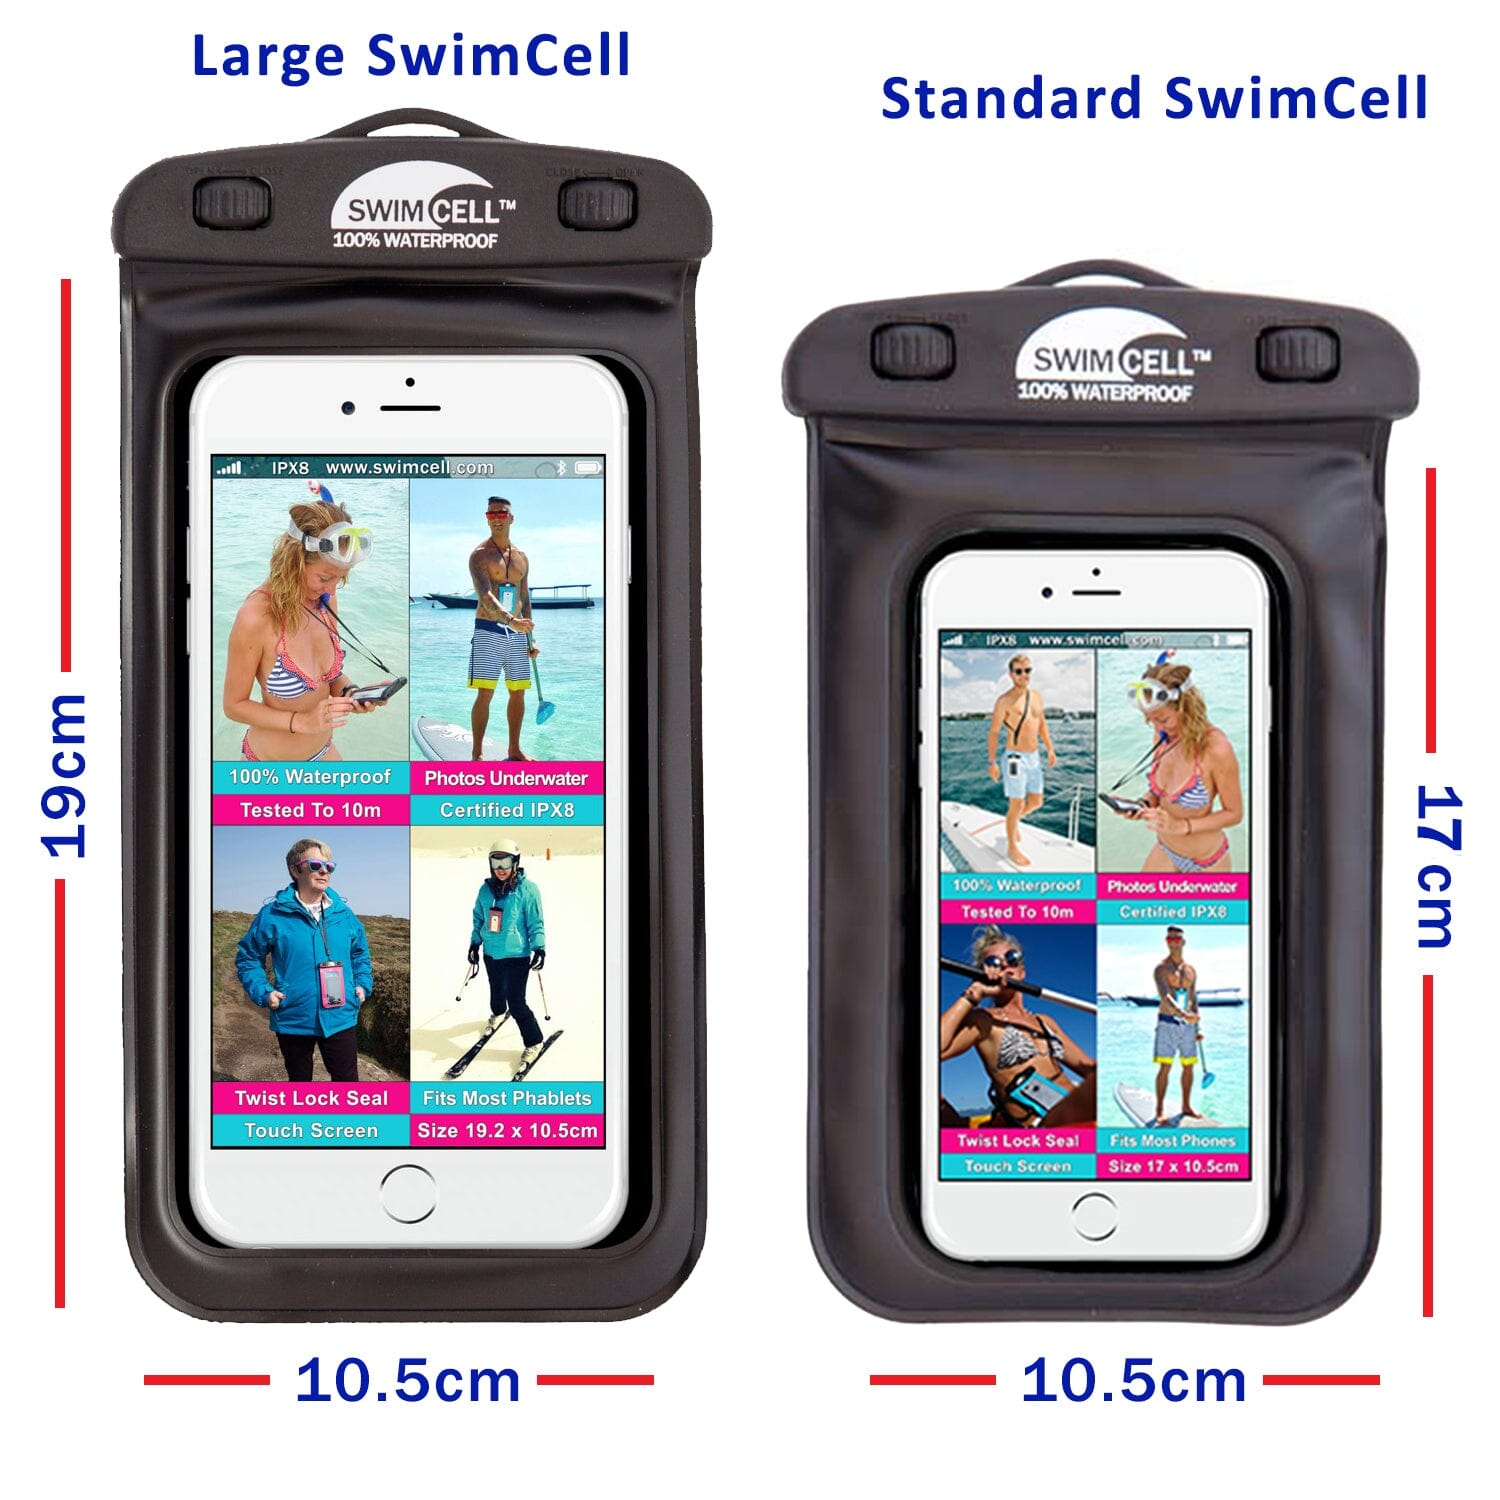 SwimCell large and standard phone case size